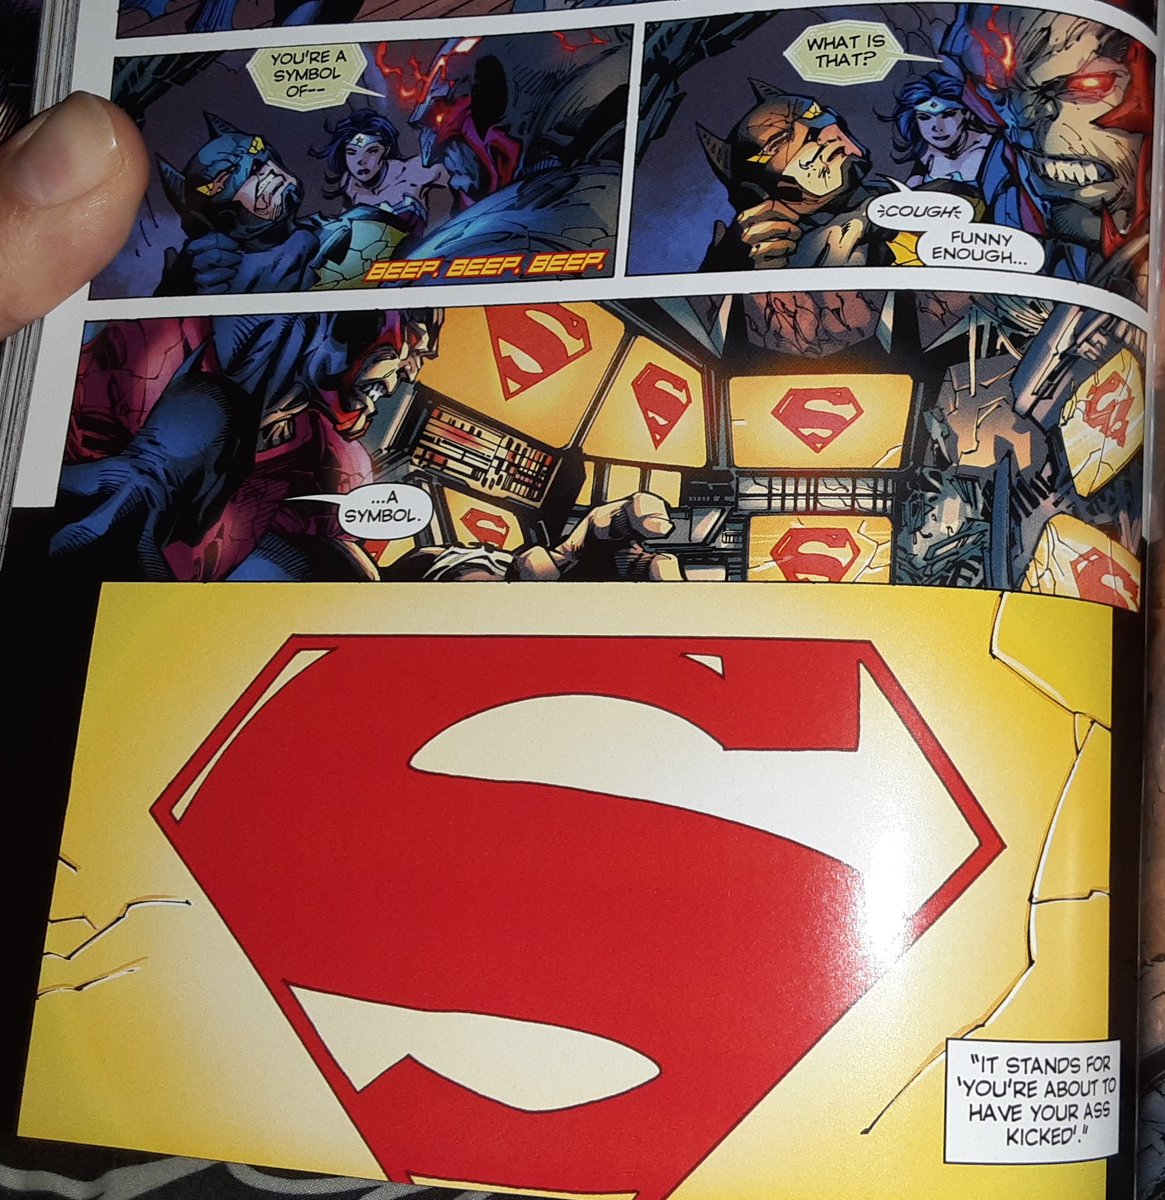 Favorite comic book moment of the week! #Supermanunchained #batman